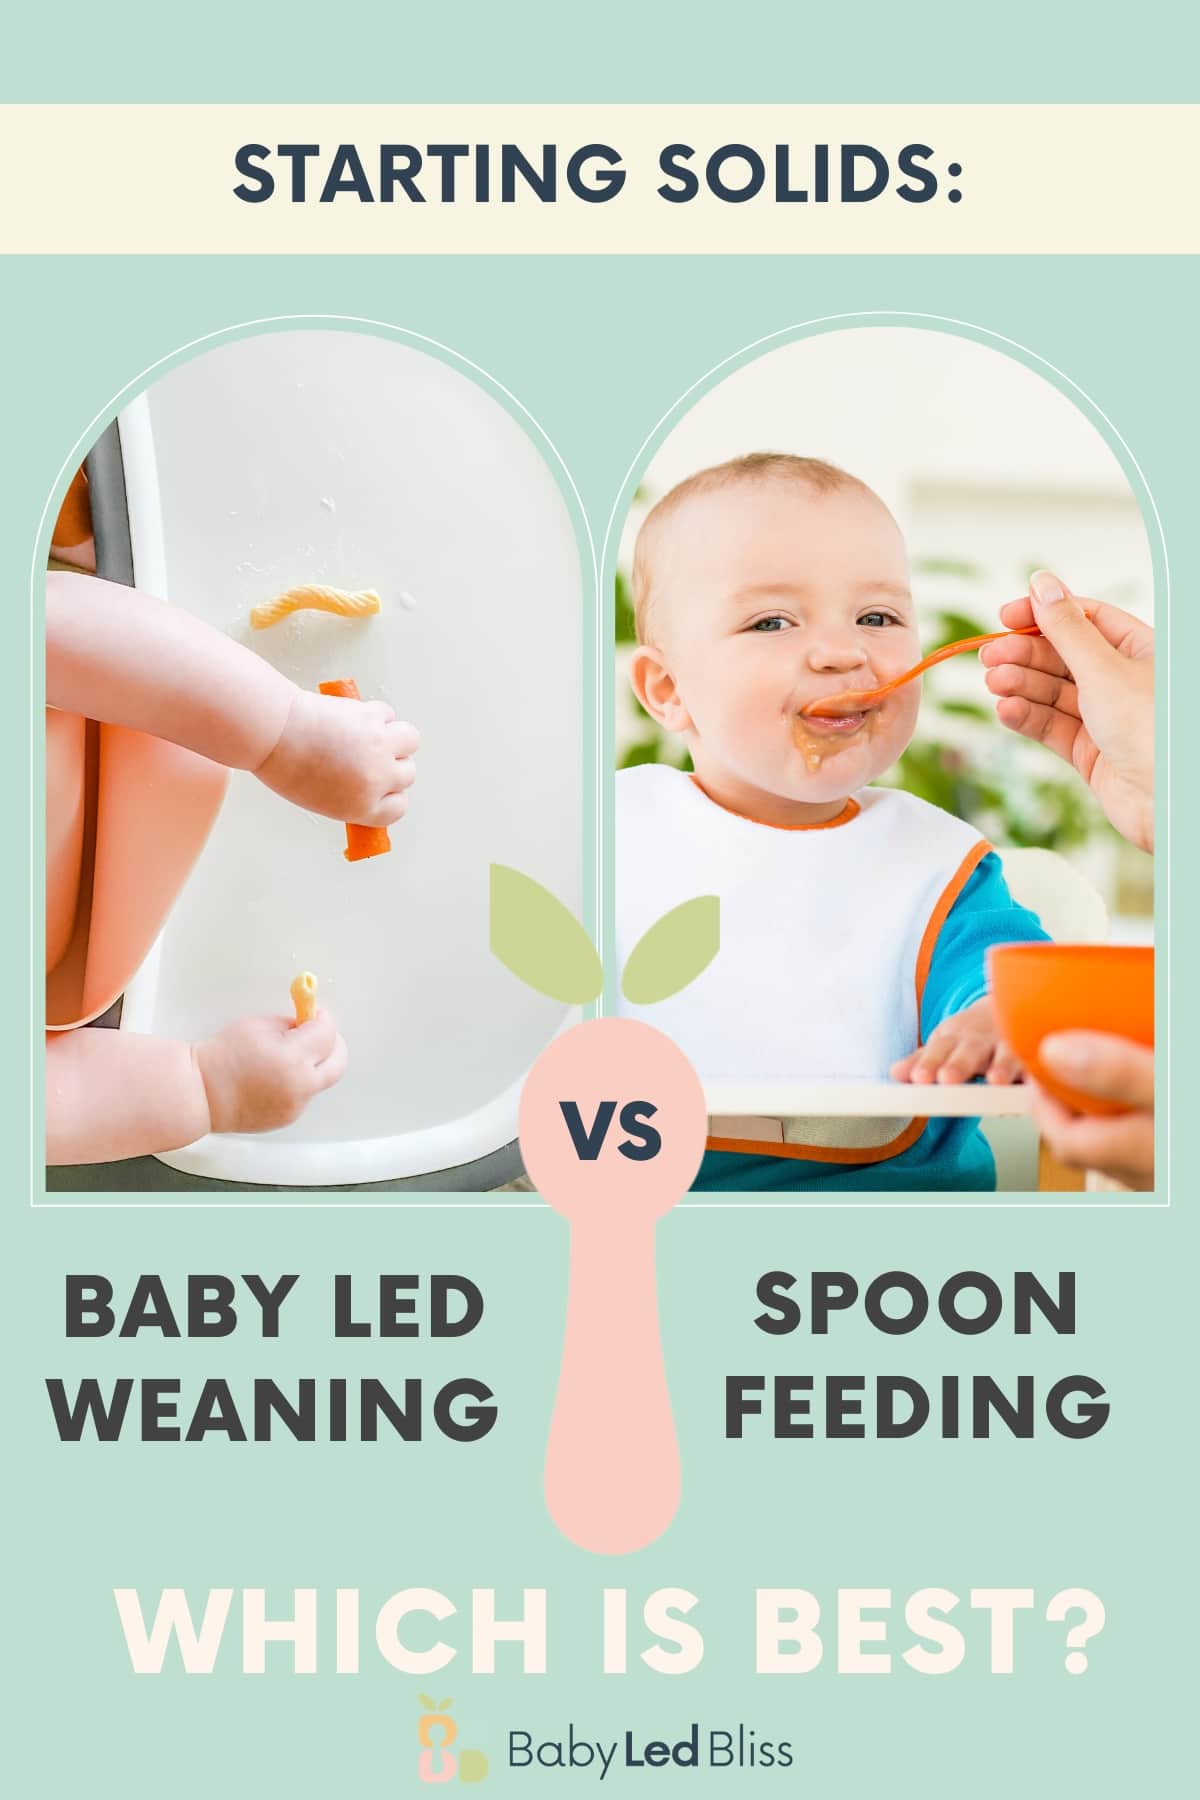 infographic with baby led waening baby hand on one side and spoon feeding baby on the other with text overlay.